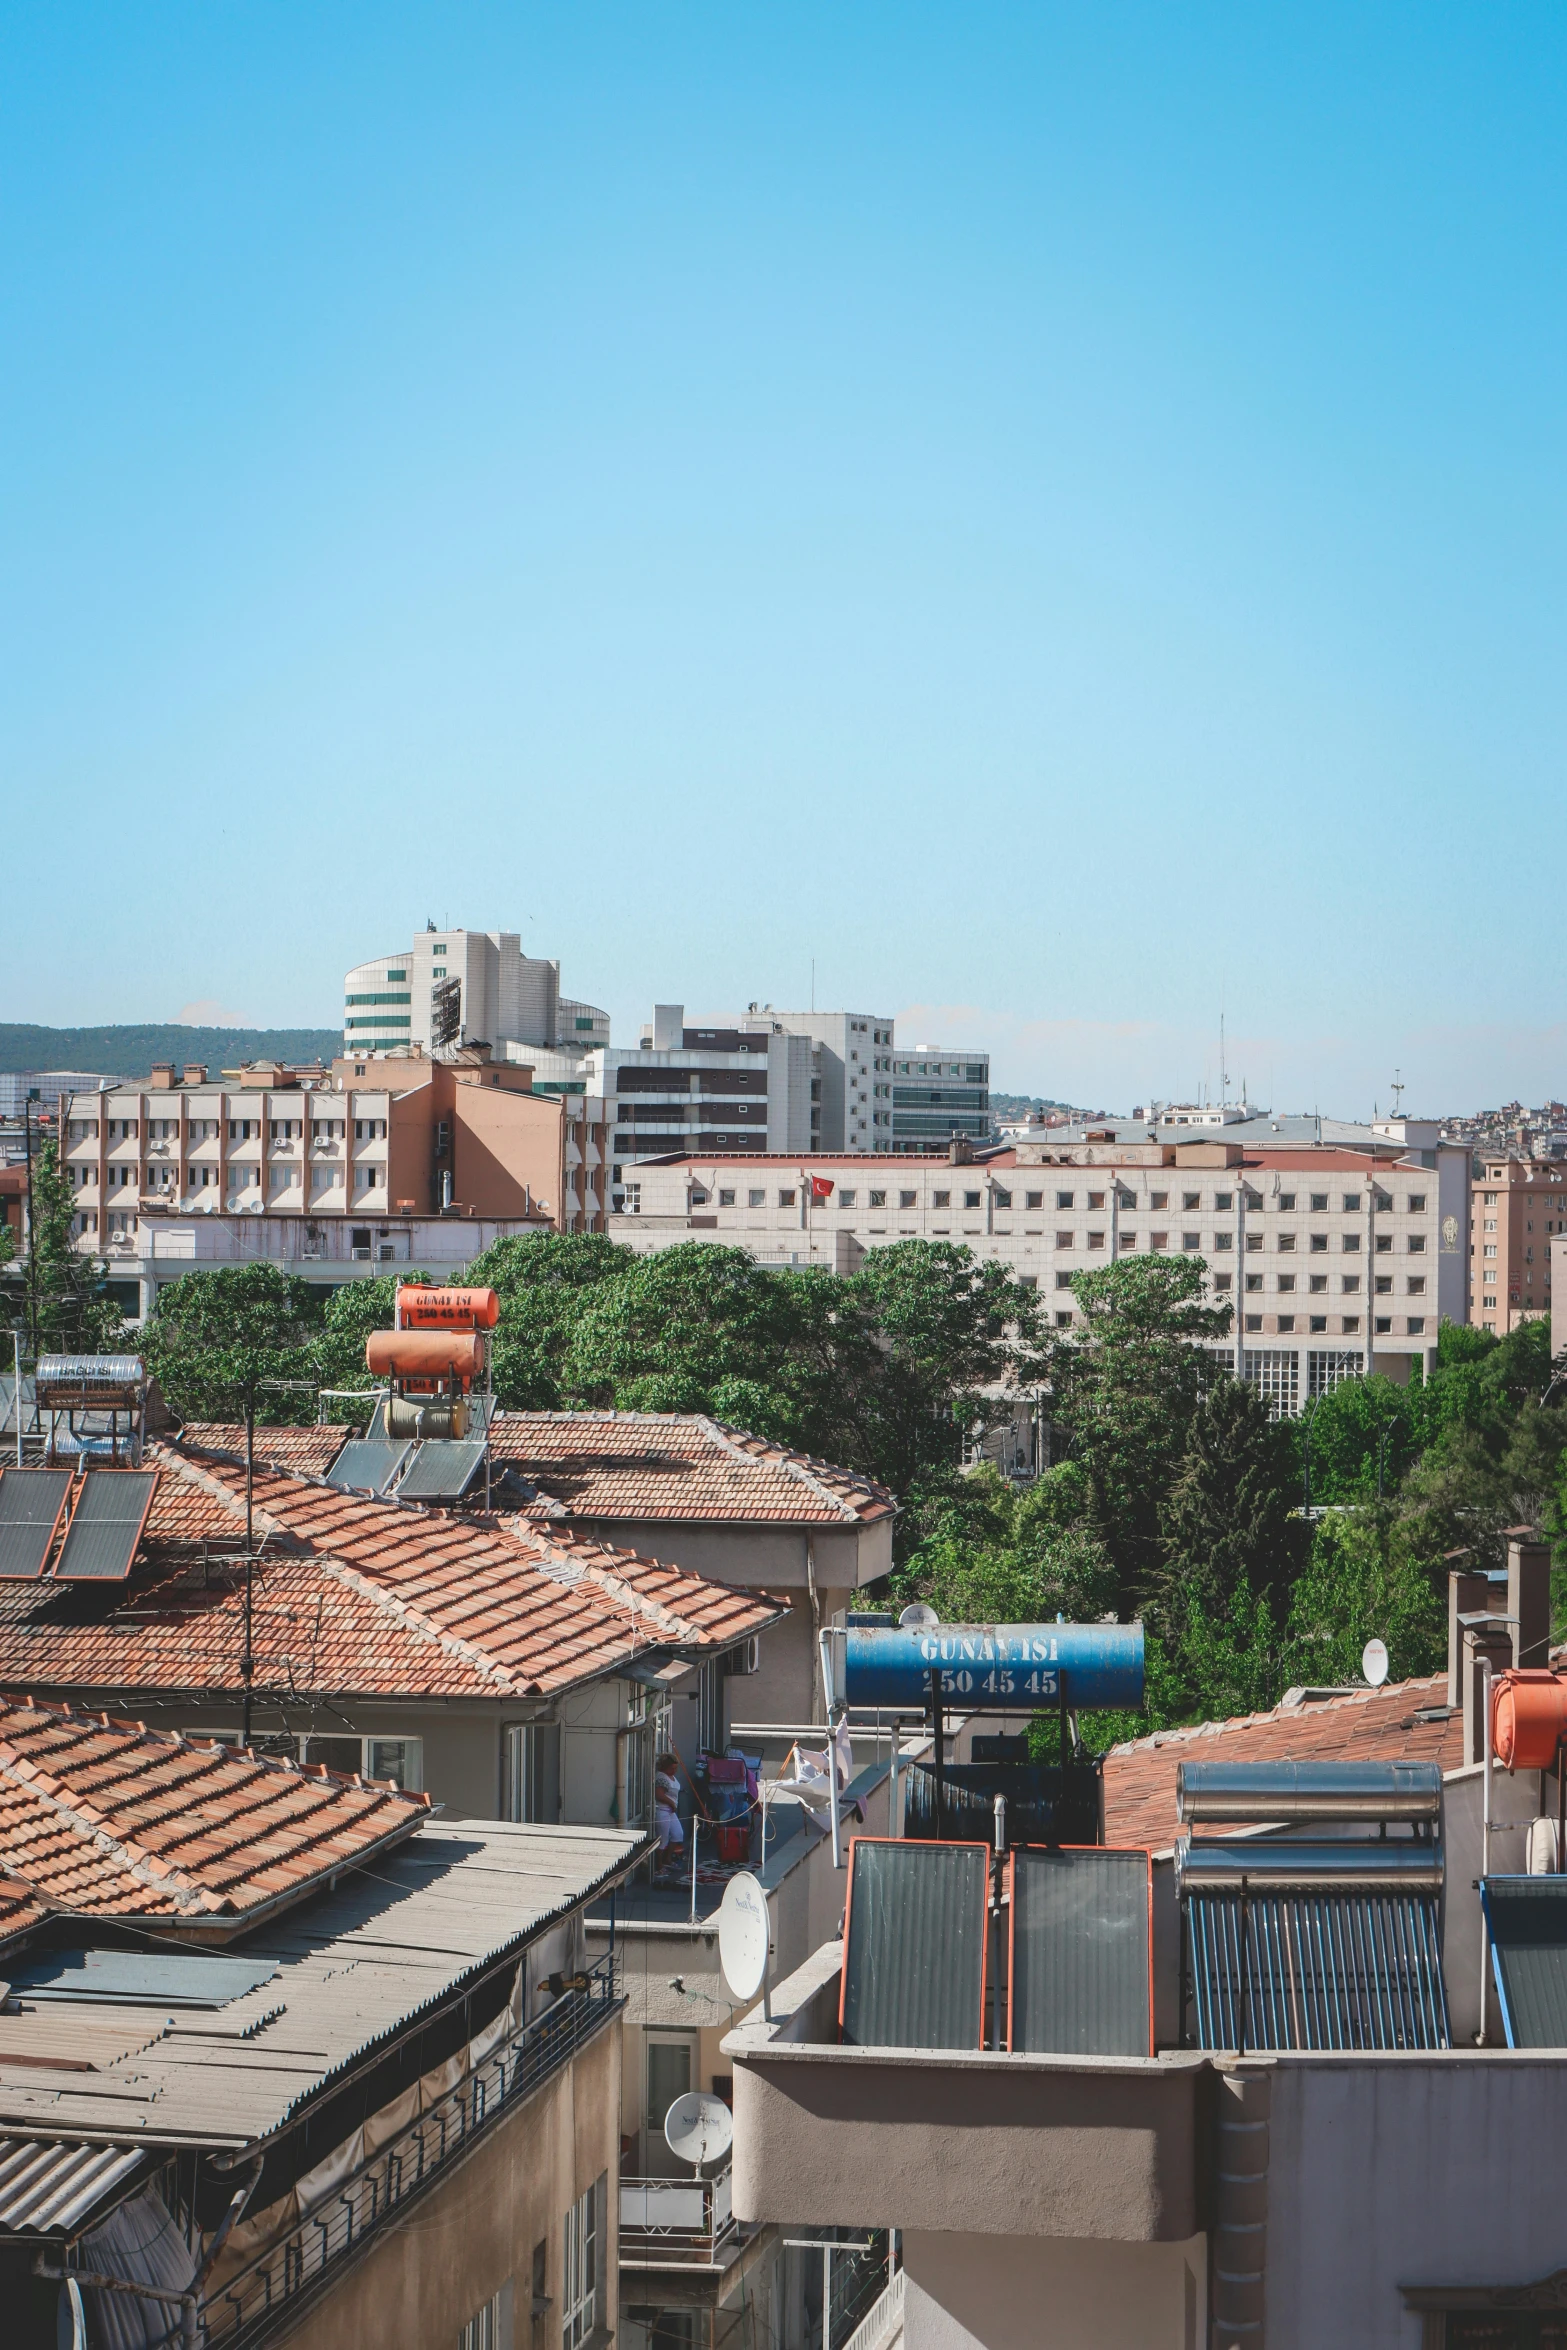 a view of a city from the top of a building, can basdogan, trees in background, midday photograph, square